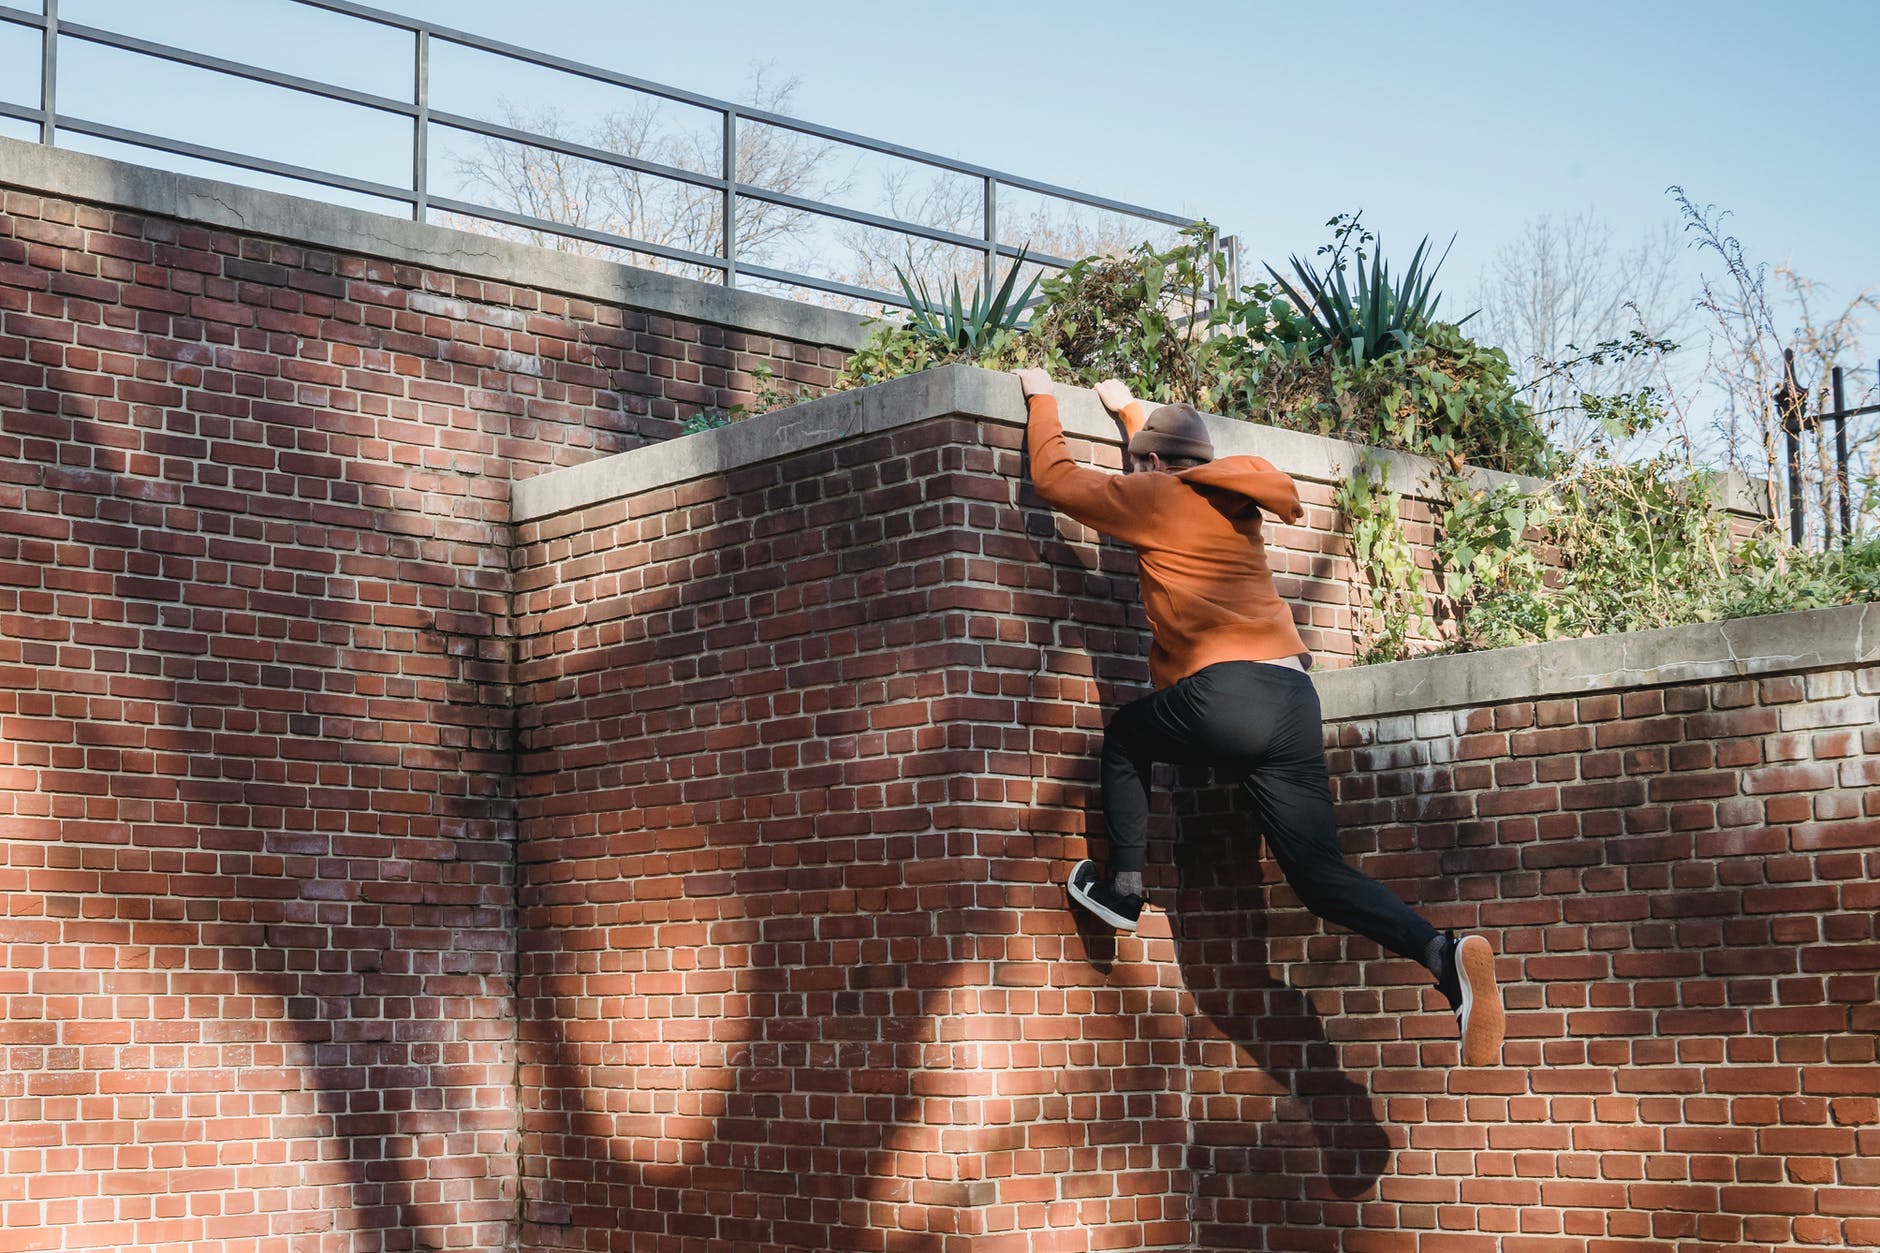 active man climbing on wall while practicing parkour skills